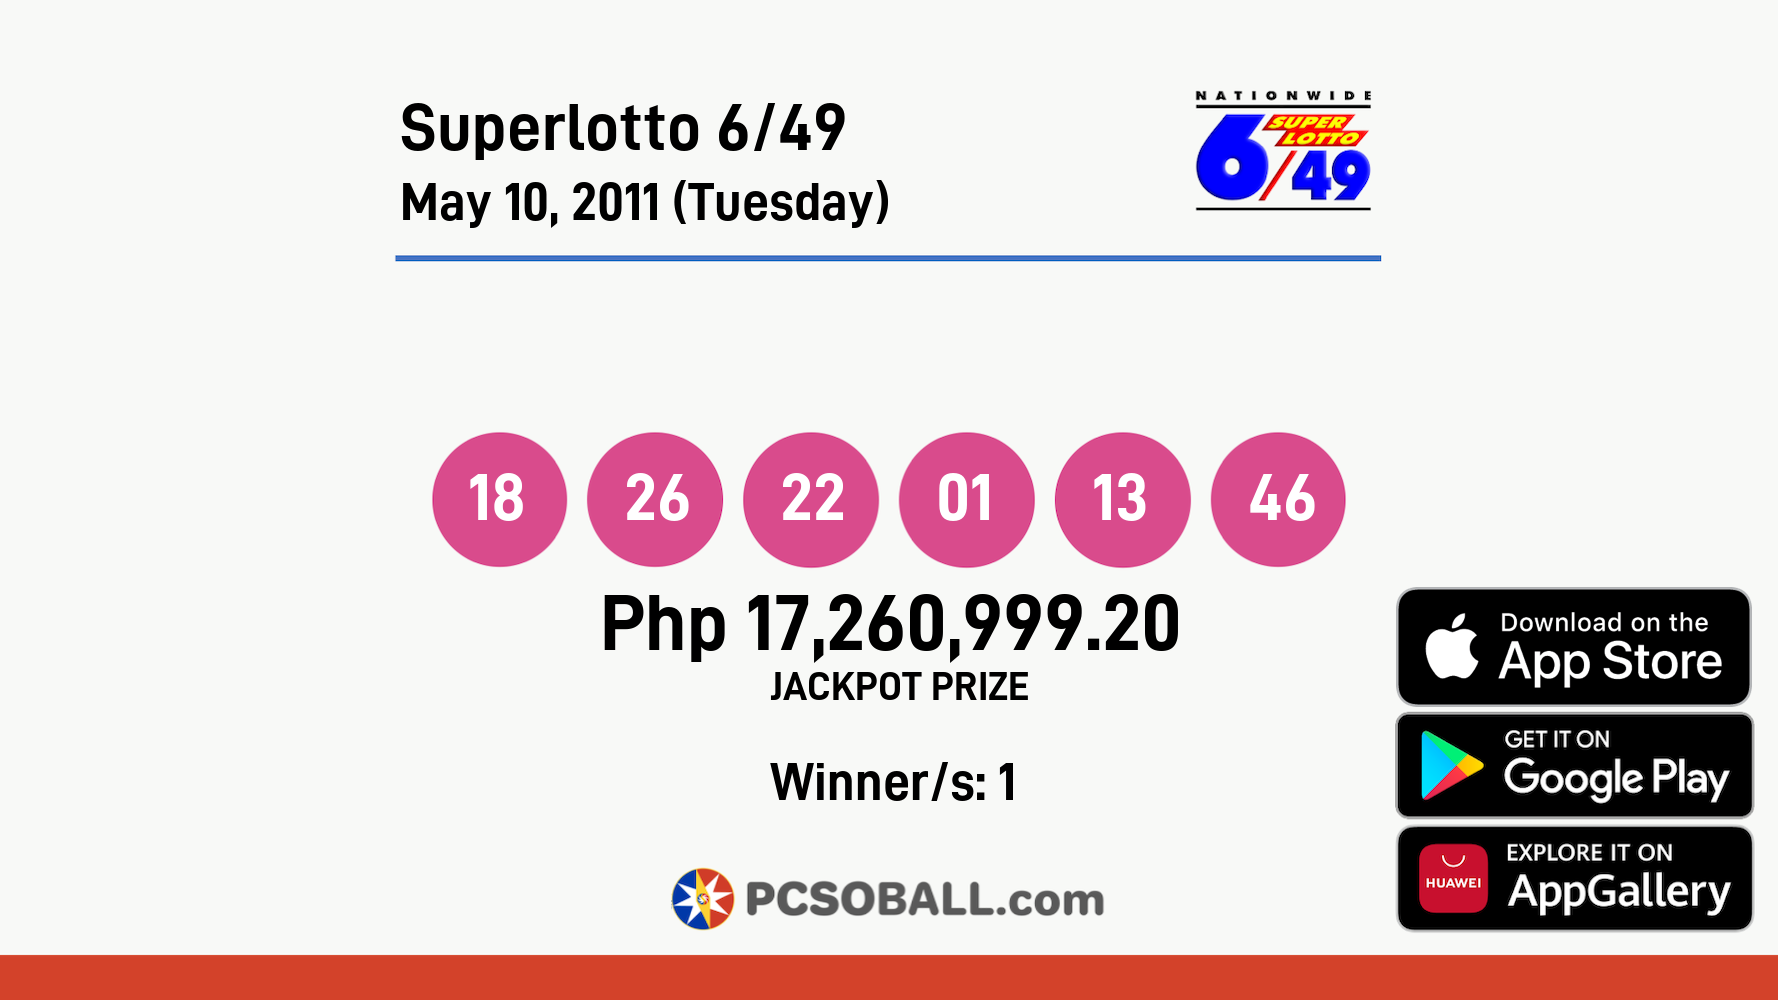 Superlotto 6/49 May 10, 2011 (Tuesday) Result